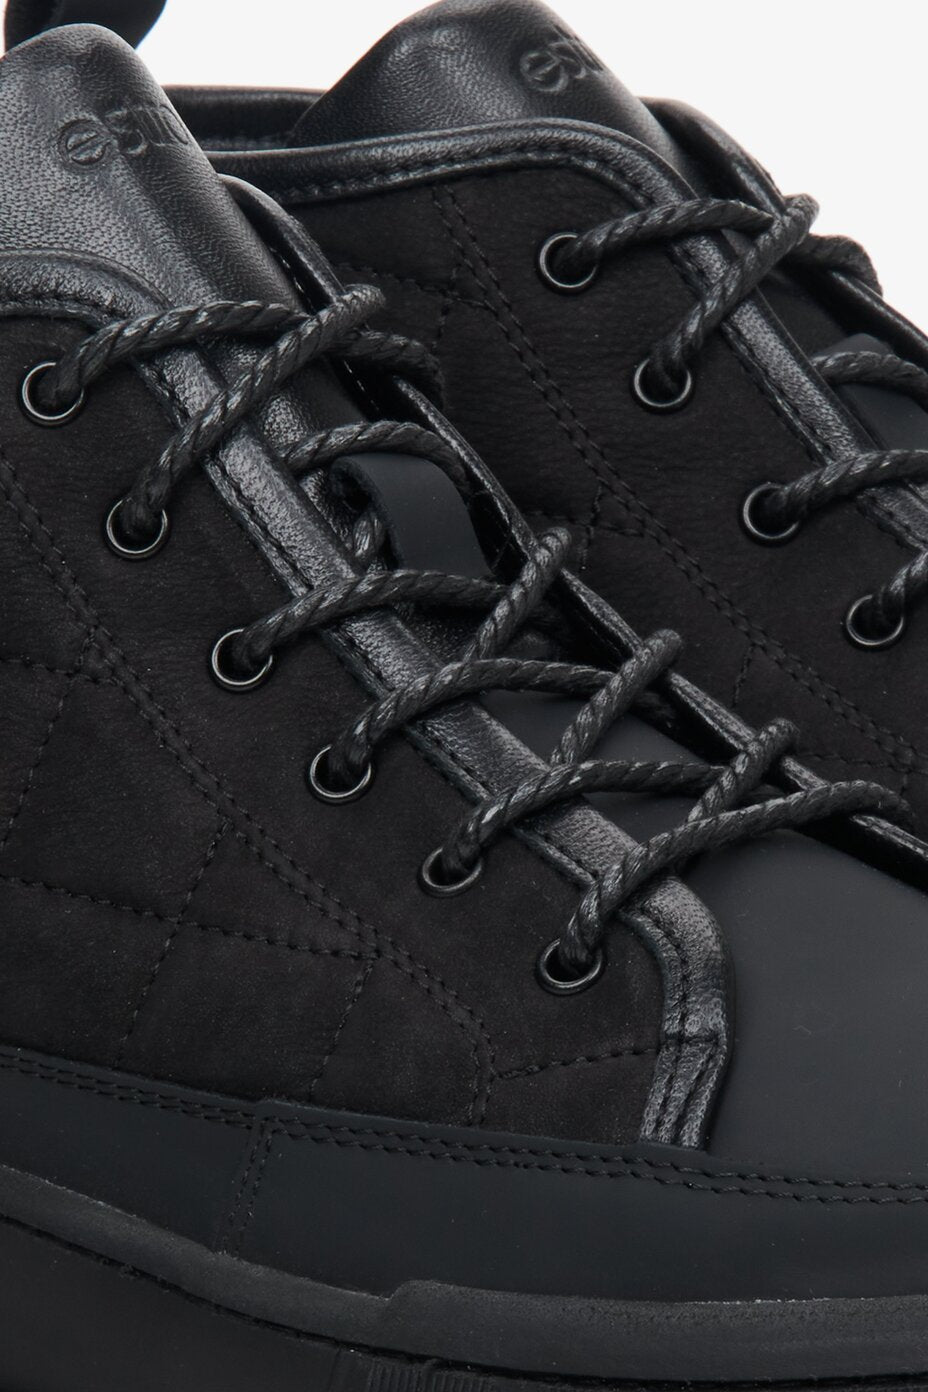 Black, high-top Estro men's winter boots - close-up of the lacing system.